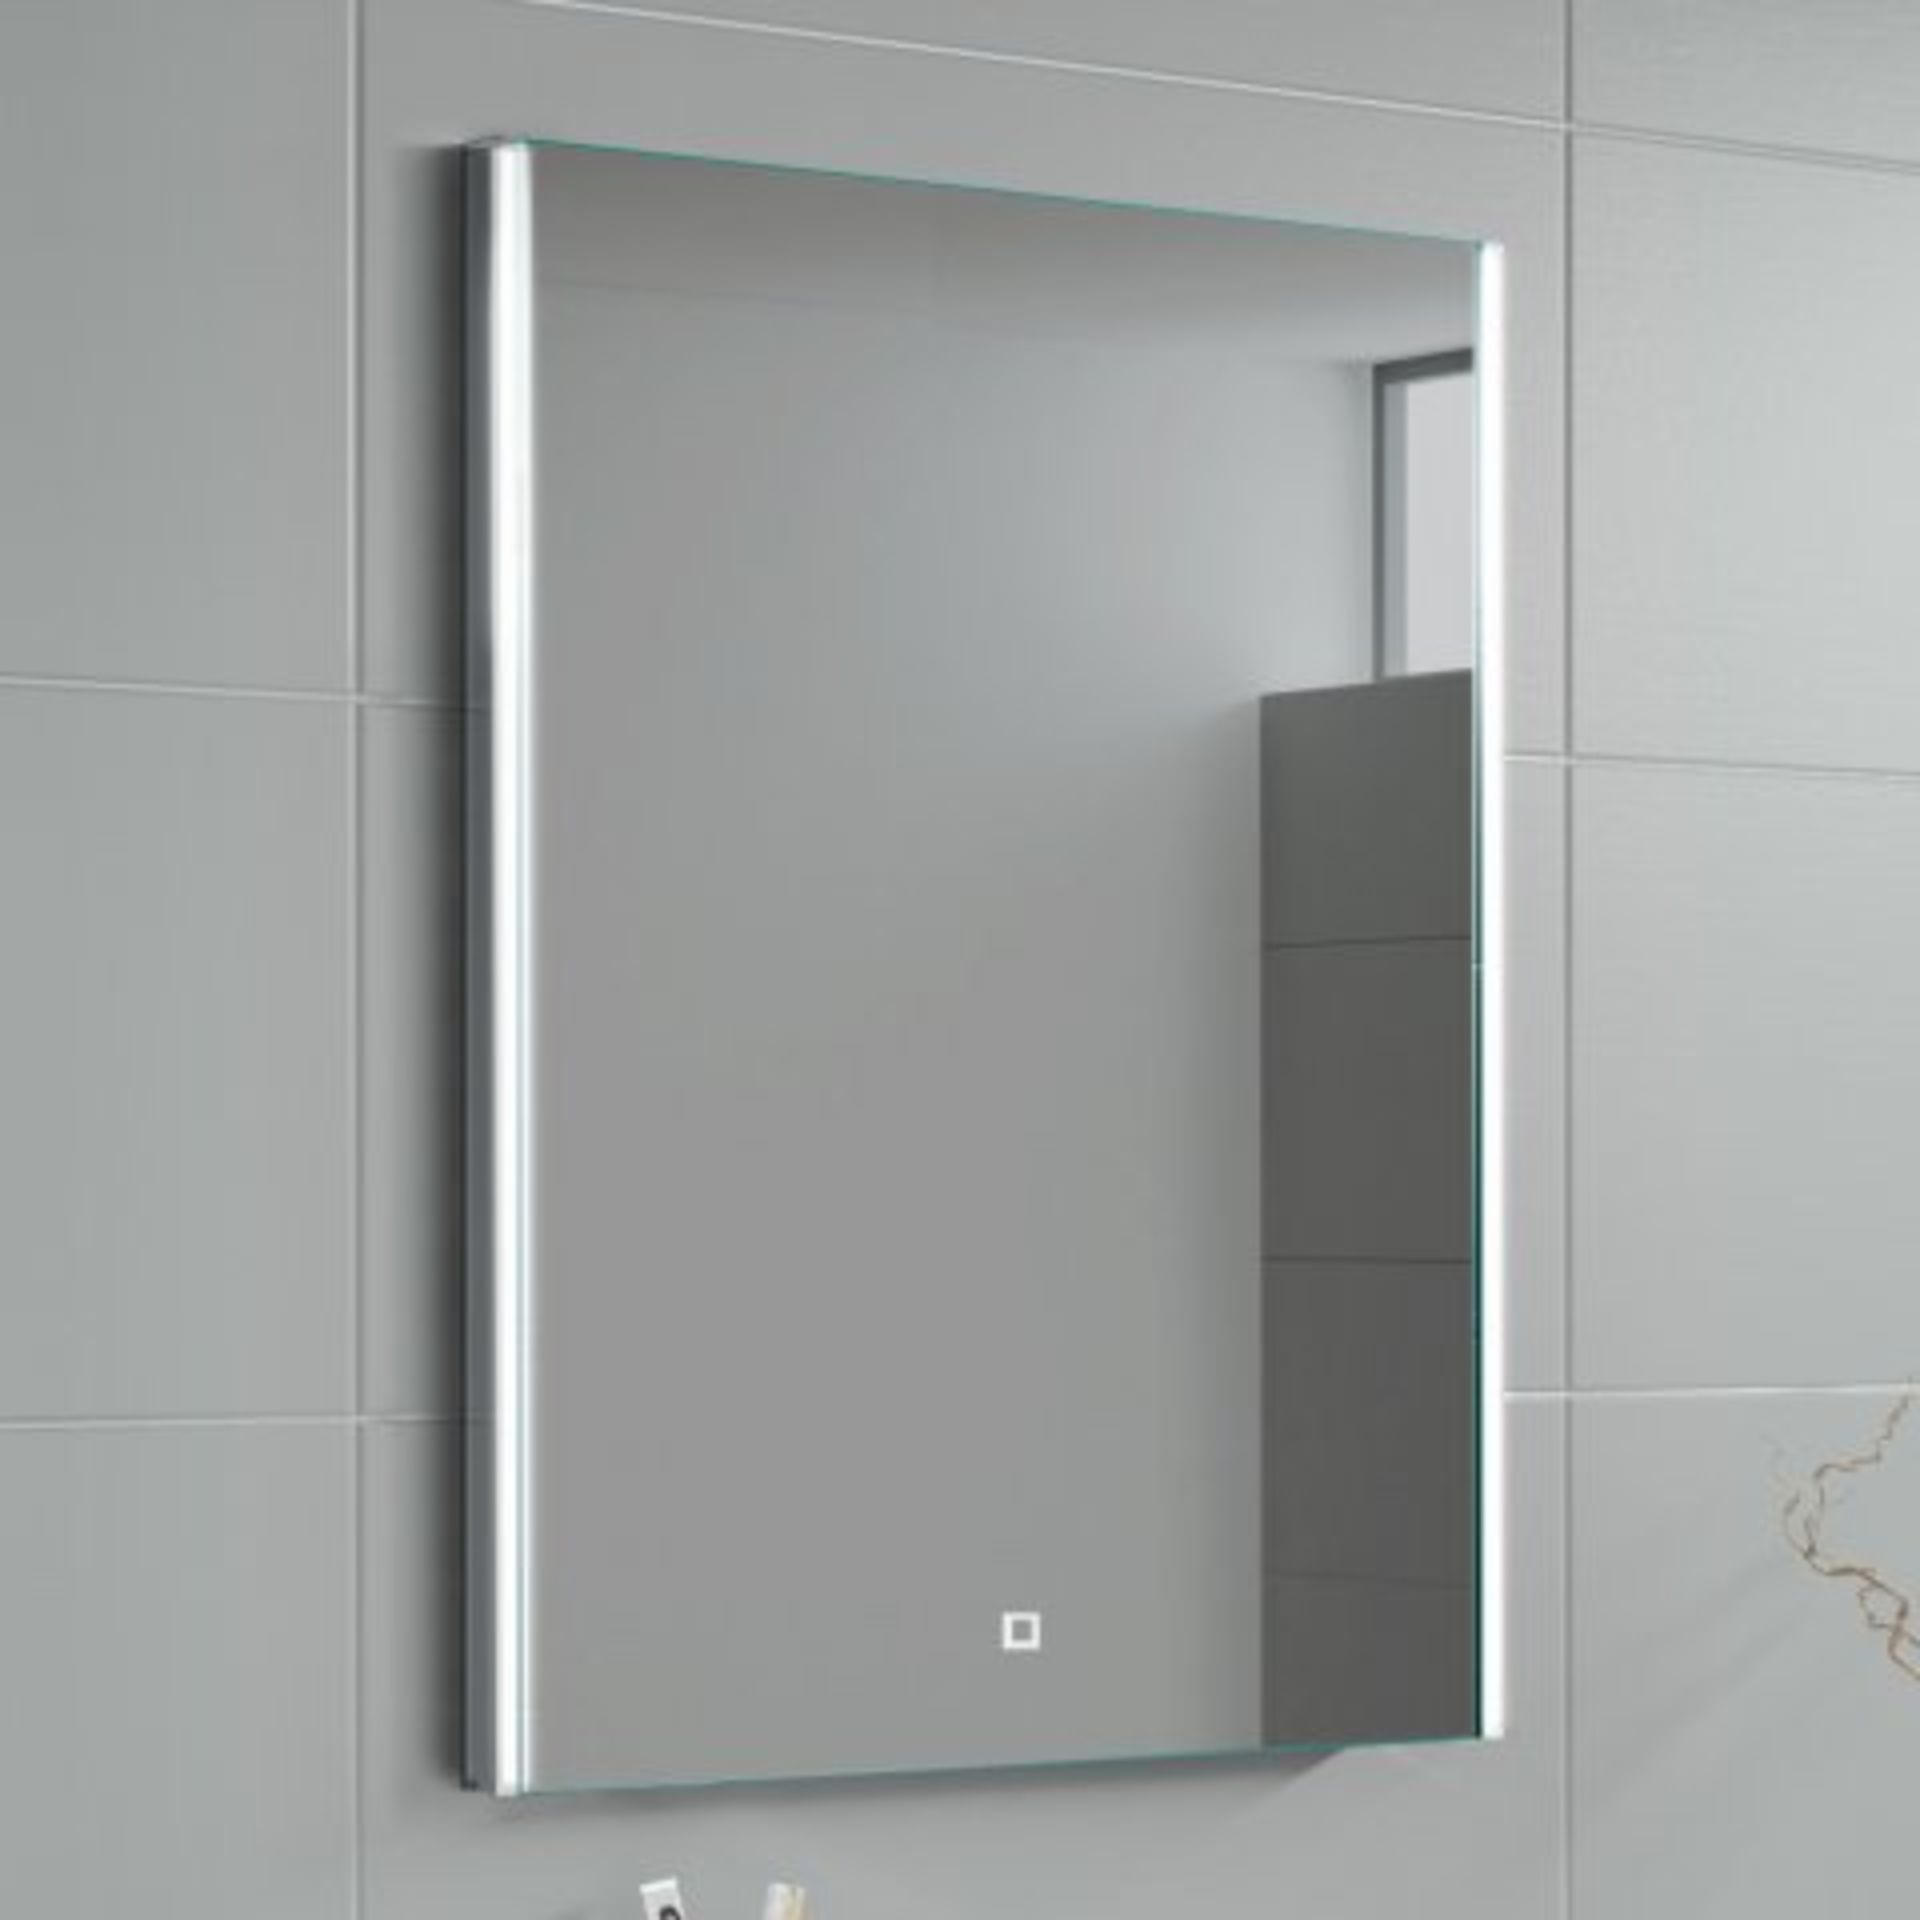 (P165) 700x500mm Lunar Illuminated LED Mirror - Switch Control. RRP £349.99. Our Lunar range of - Image 3 of 5